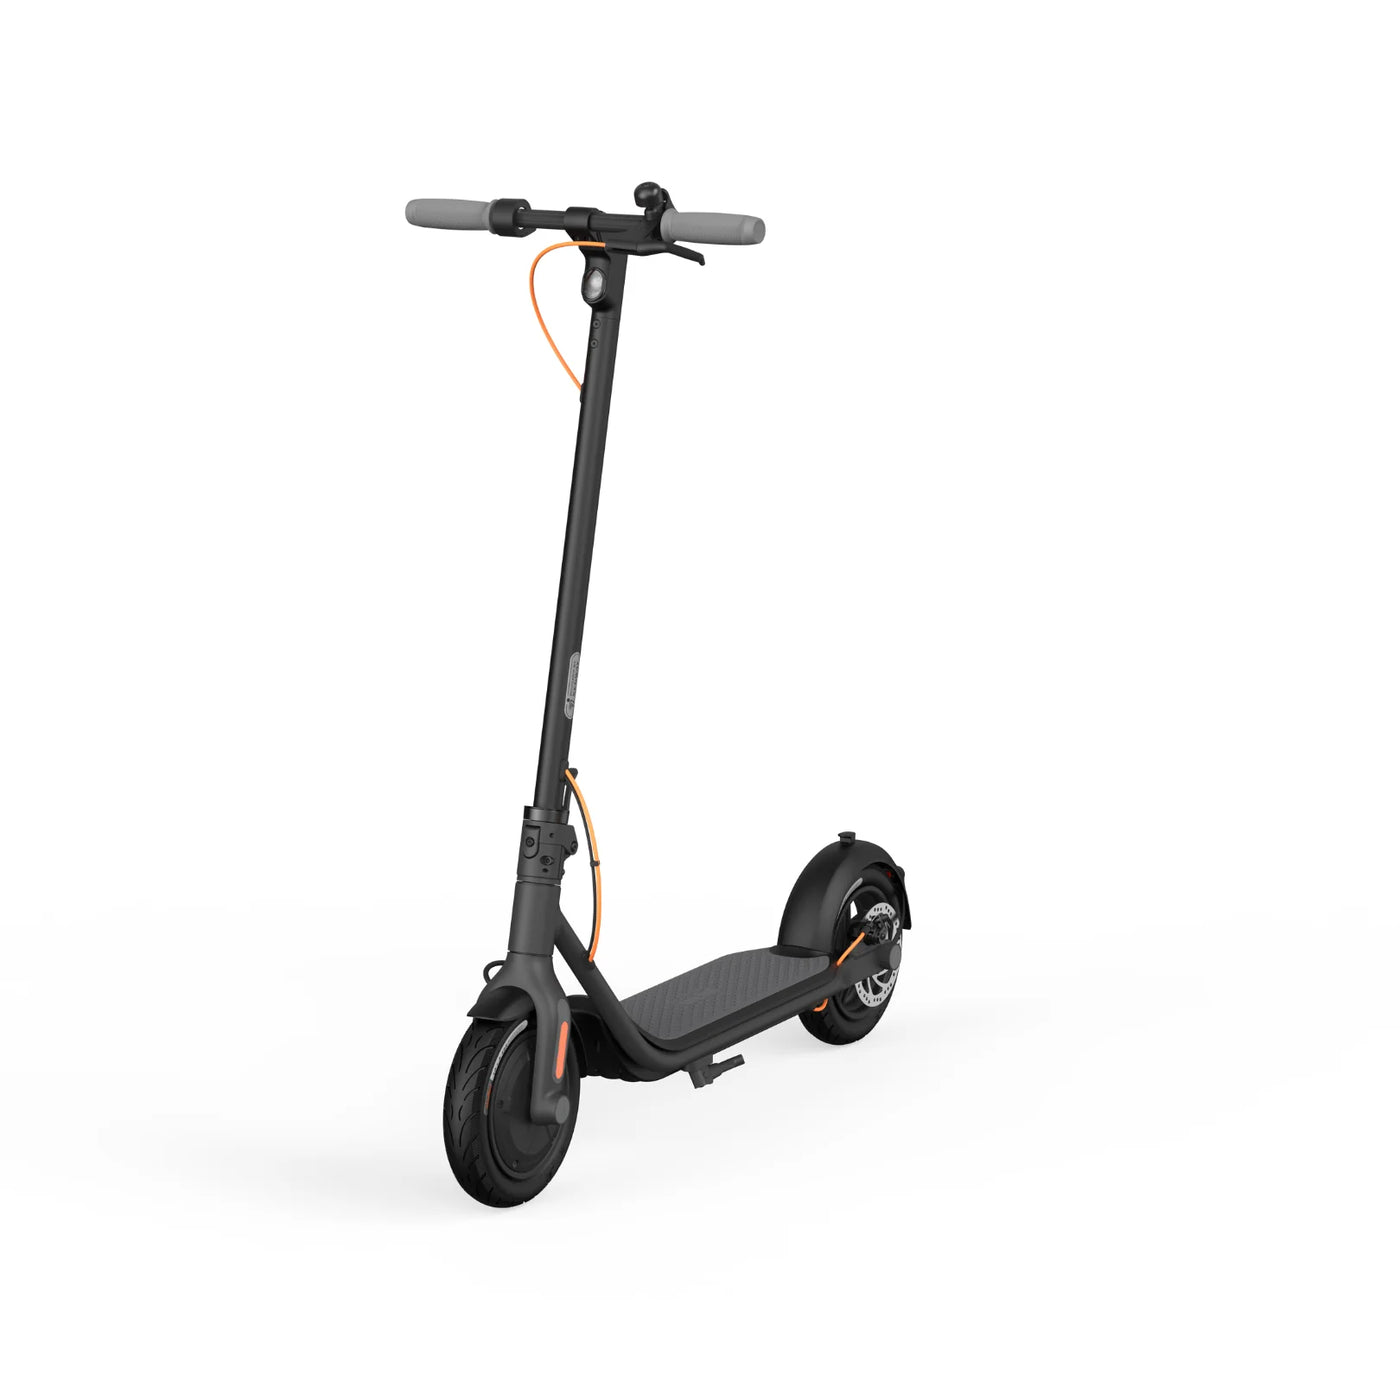 Segway-Ninebot F30 Electric Scooter 6 Months Free Service